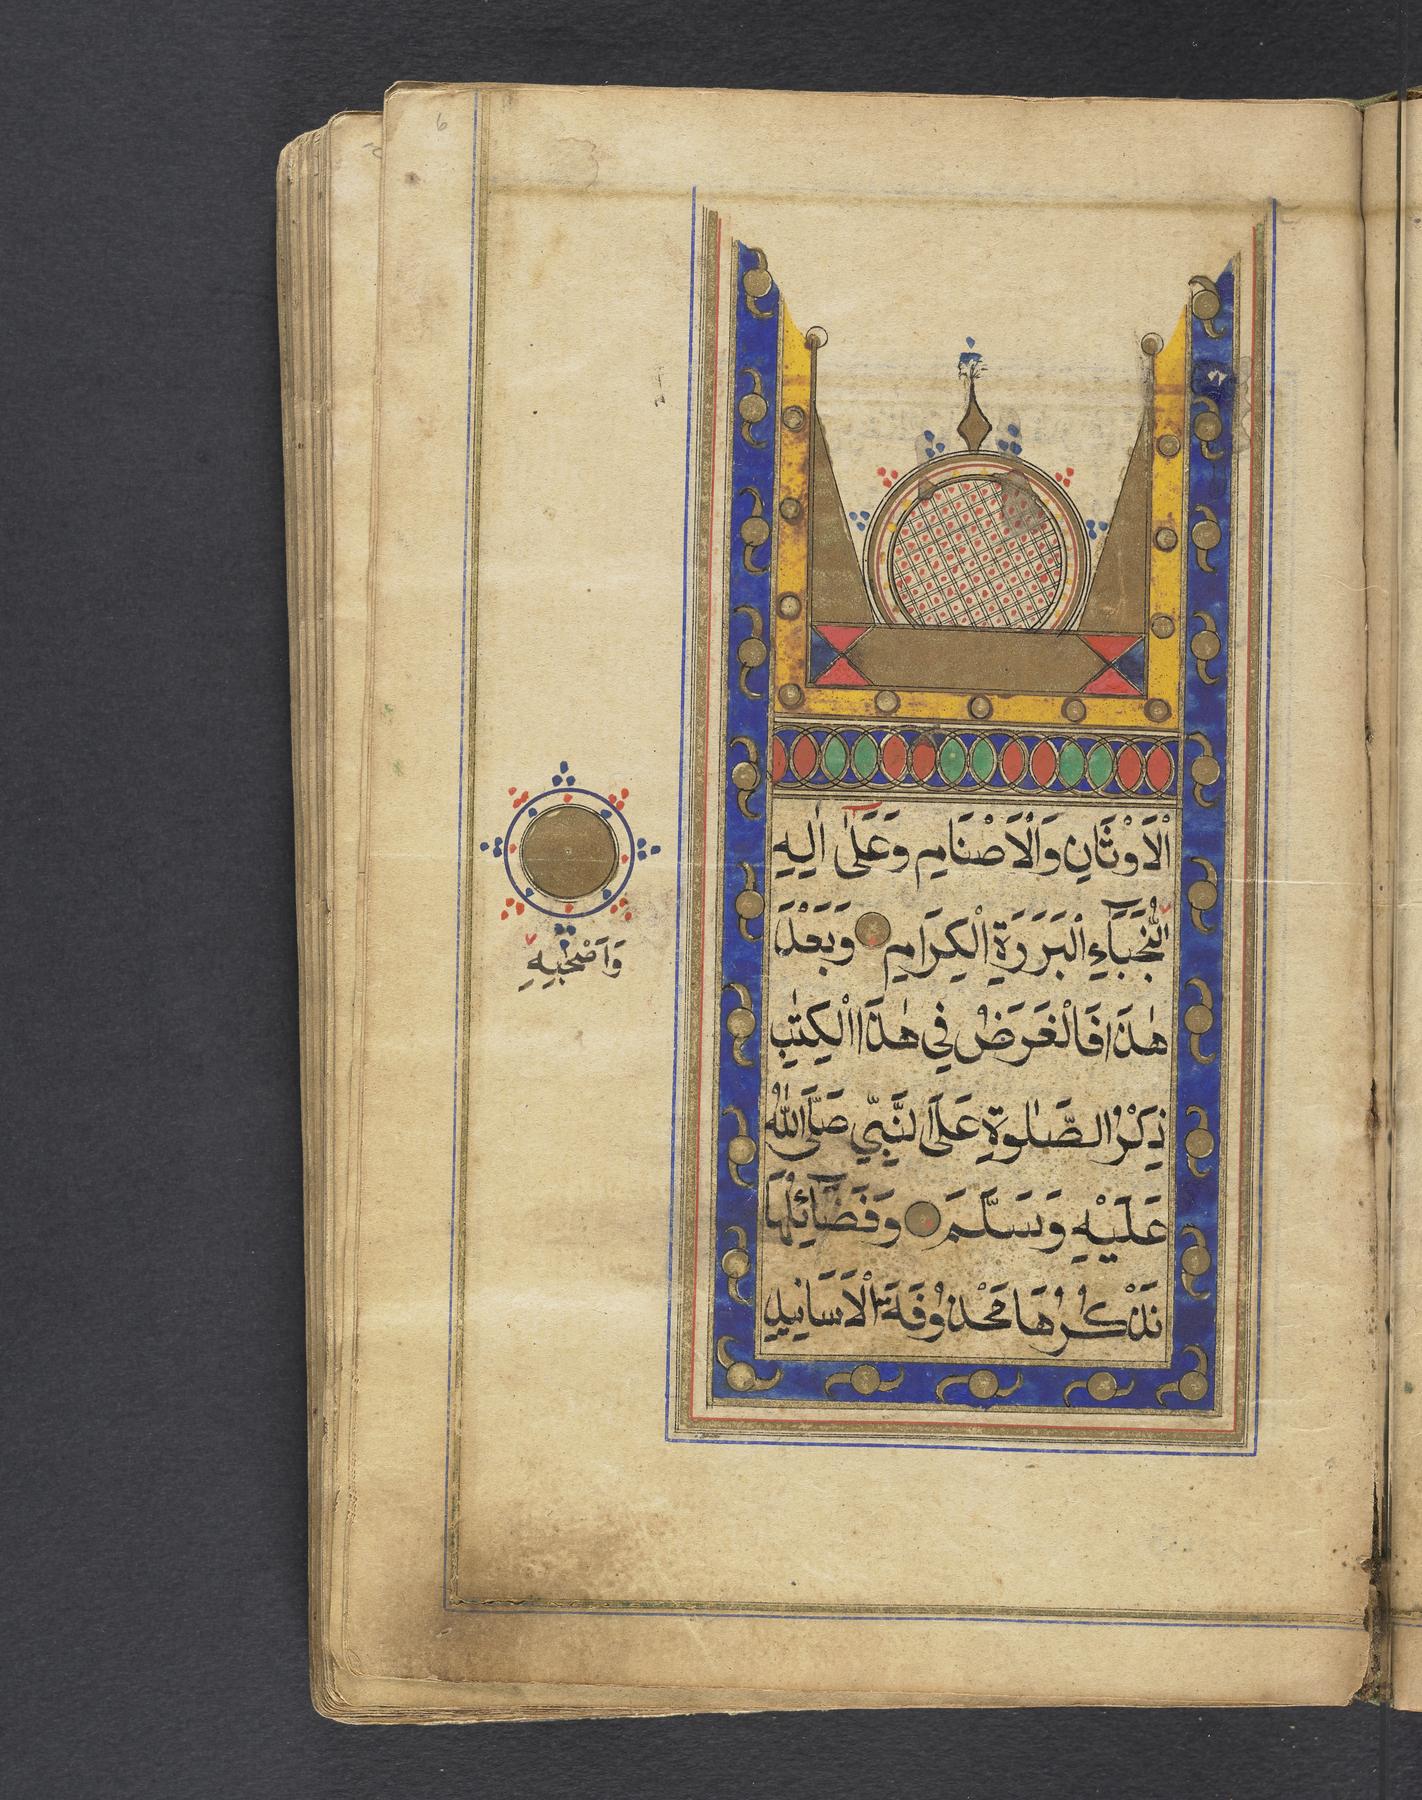 Coffee with a Codex: Prayers for the Prophet Muḥammad